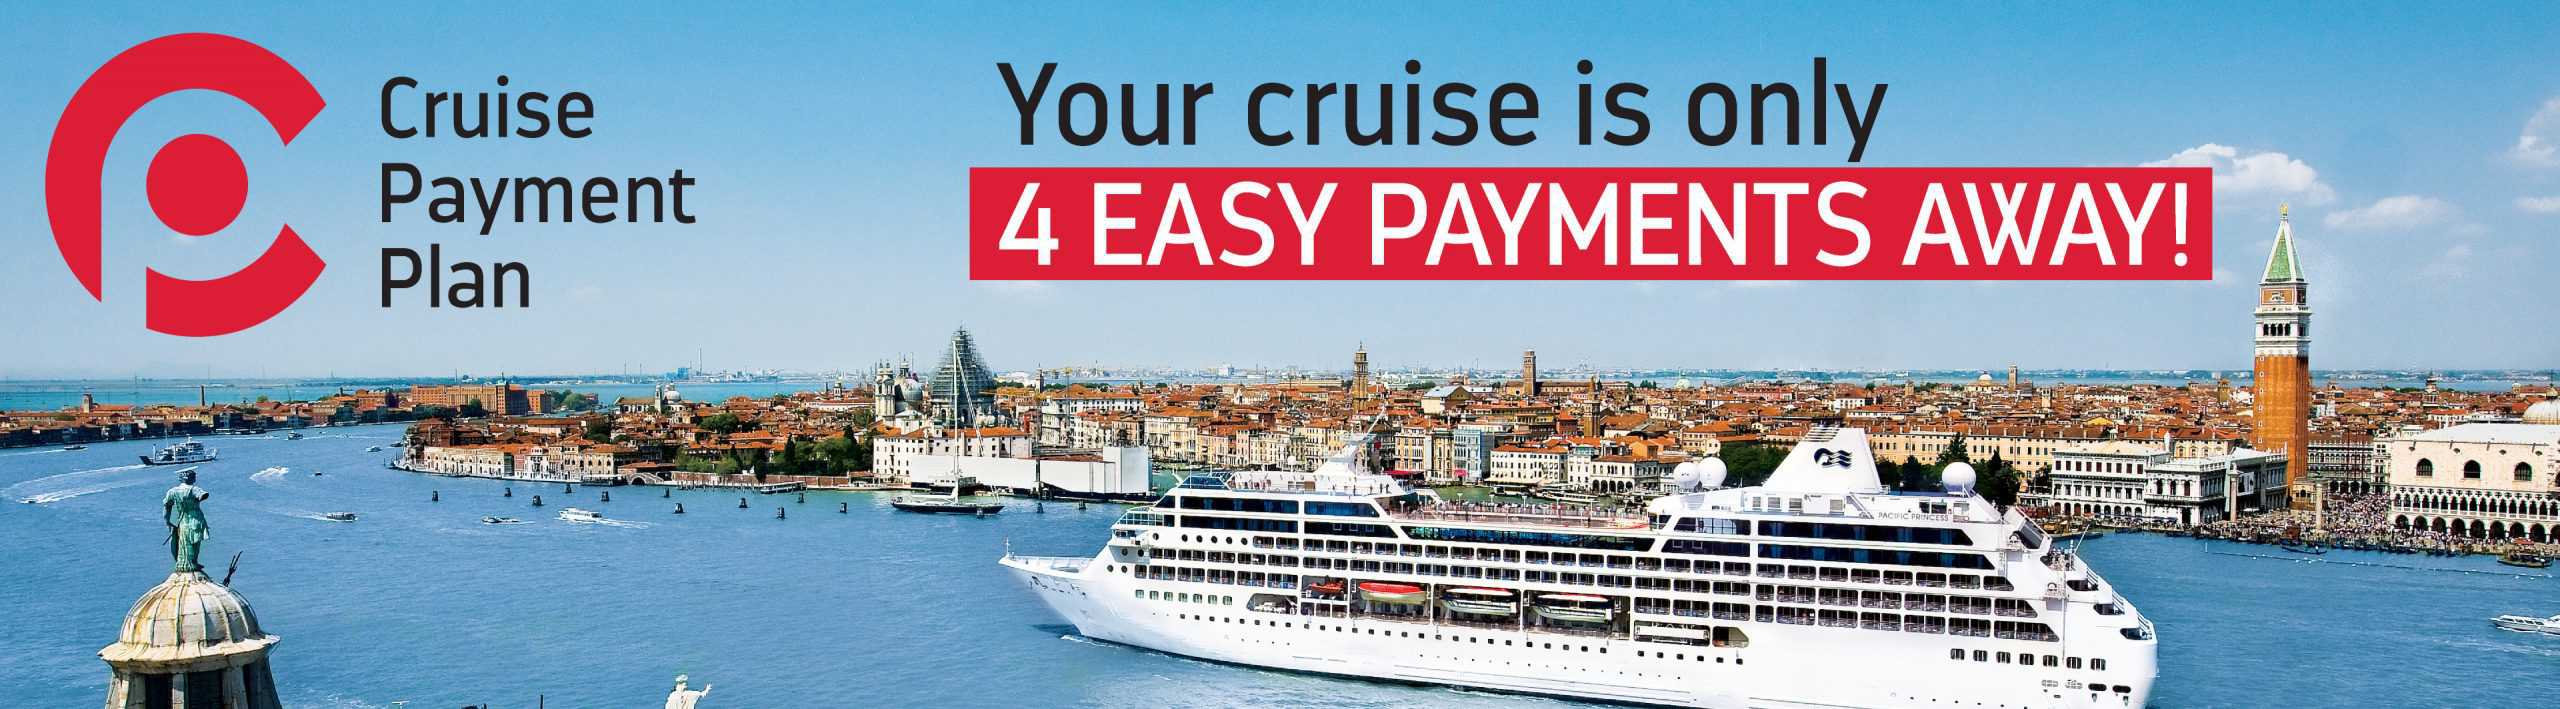 cruise-payment-plan-4-easy-payments-cruise-guru